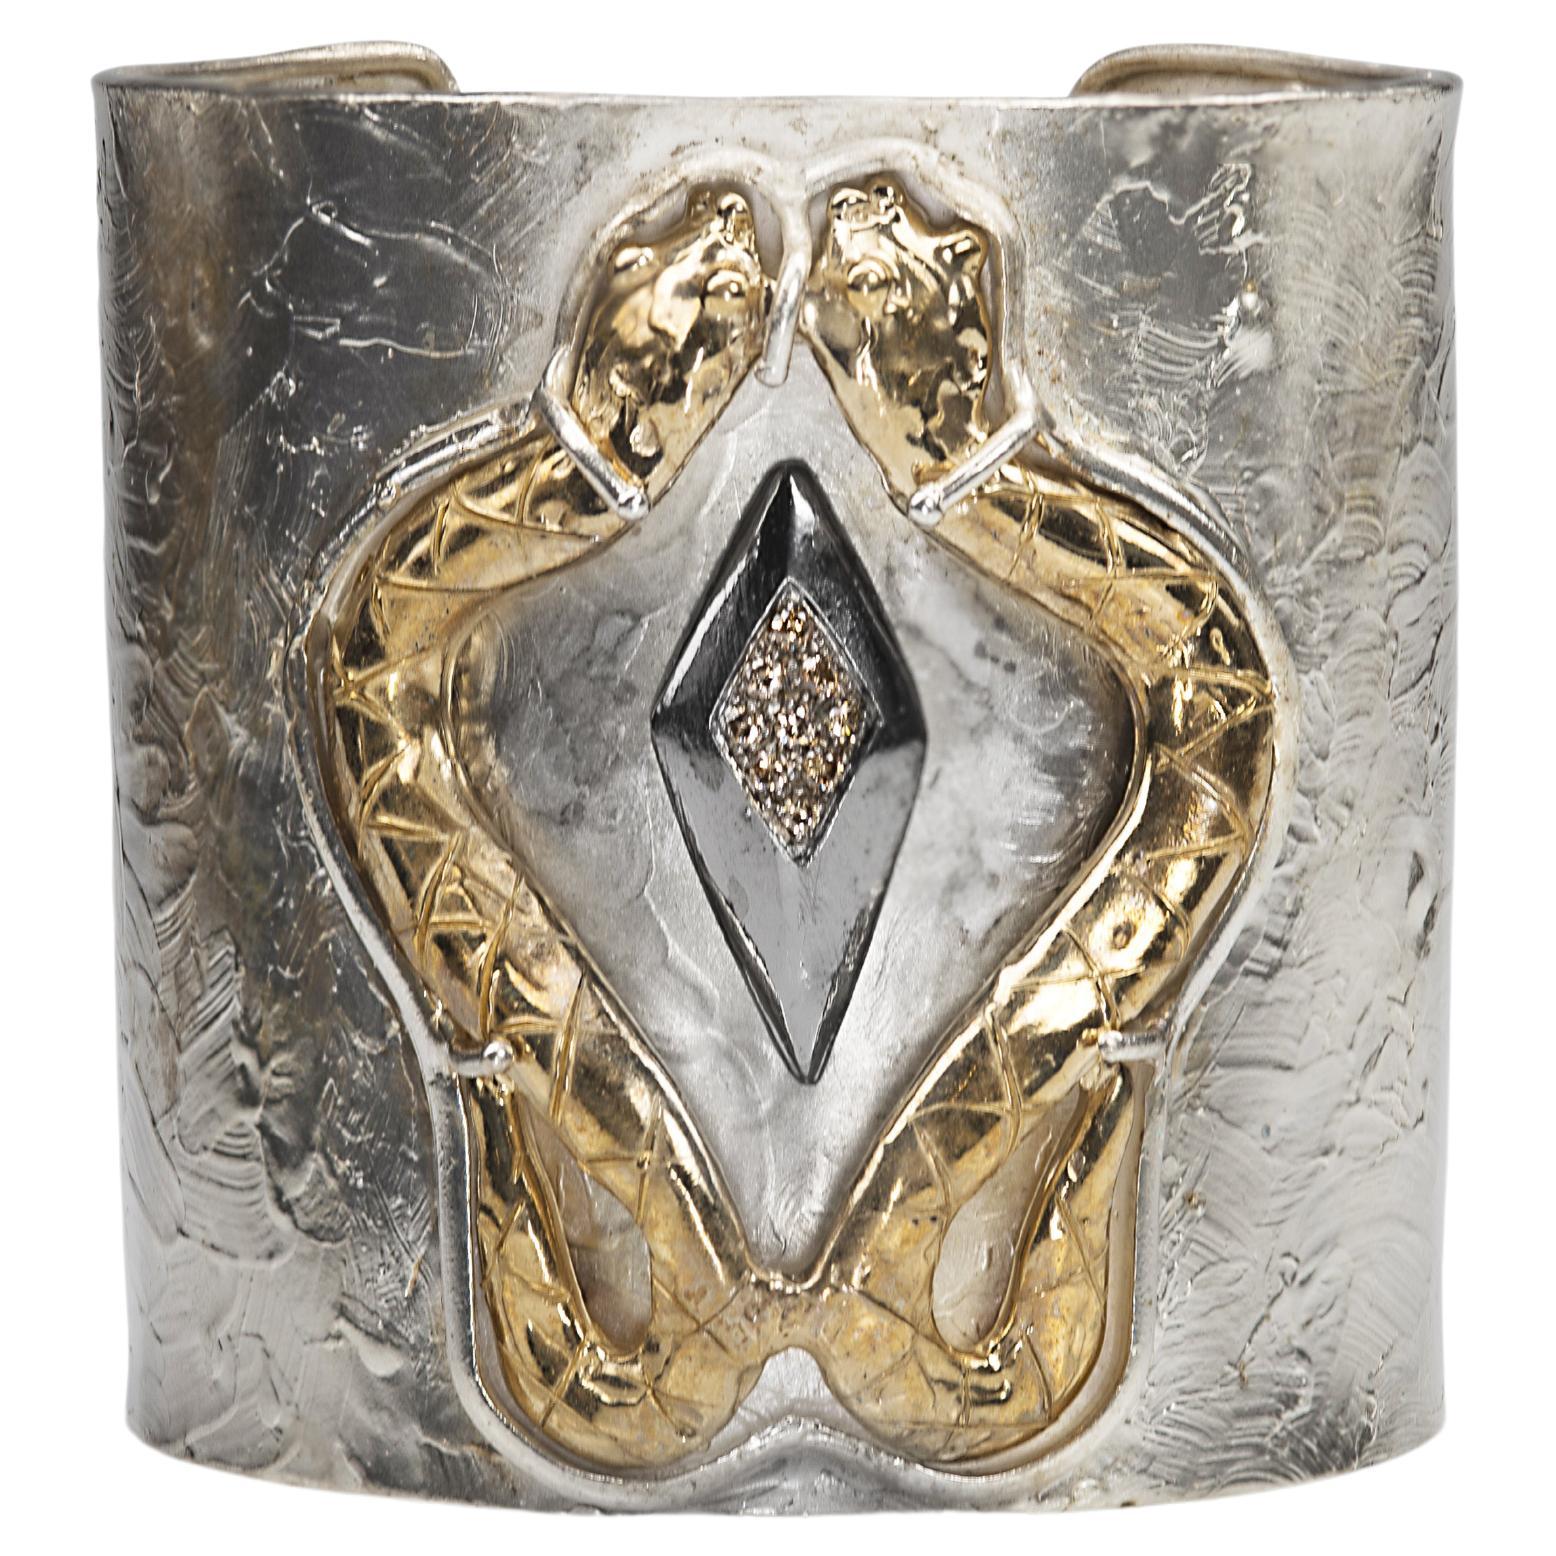 Rossella Ugolini Design Collection  a Fierce Sensual Cuff Snakes Bracelet Handcrafted in 24 Karat Gold Plated Silver Sterling and 0.20 Karat Brown Diamonds.
On the Modern Silver Sterling bracelet two 24 Karats gold plated bronzed snakes meet and by